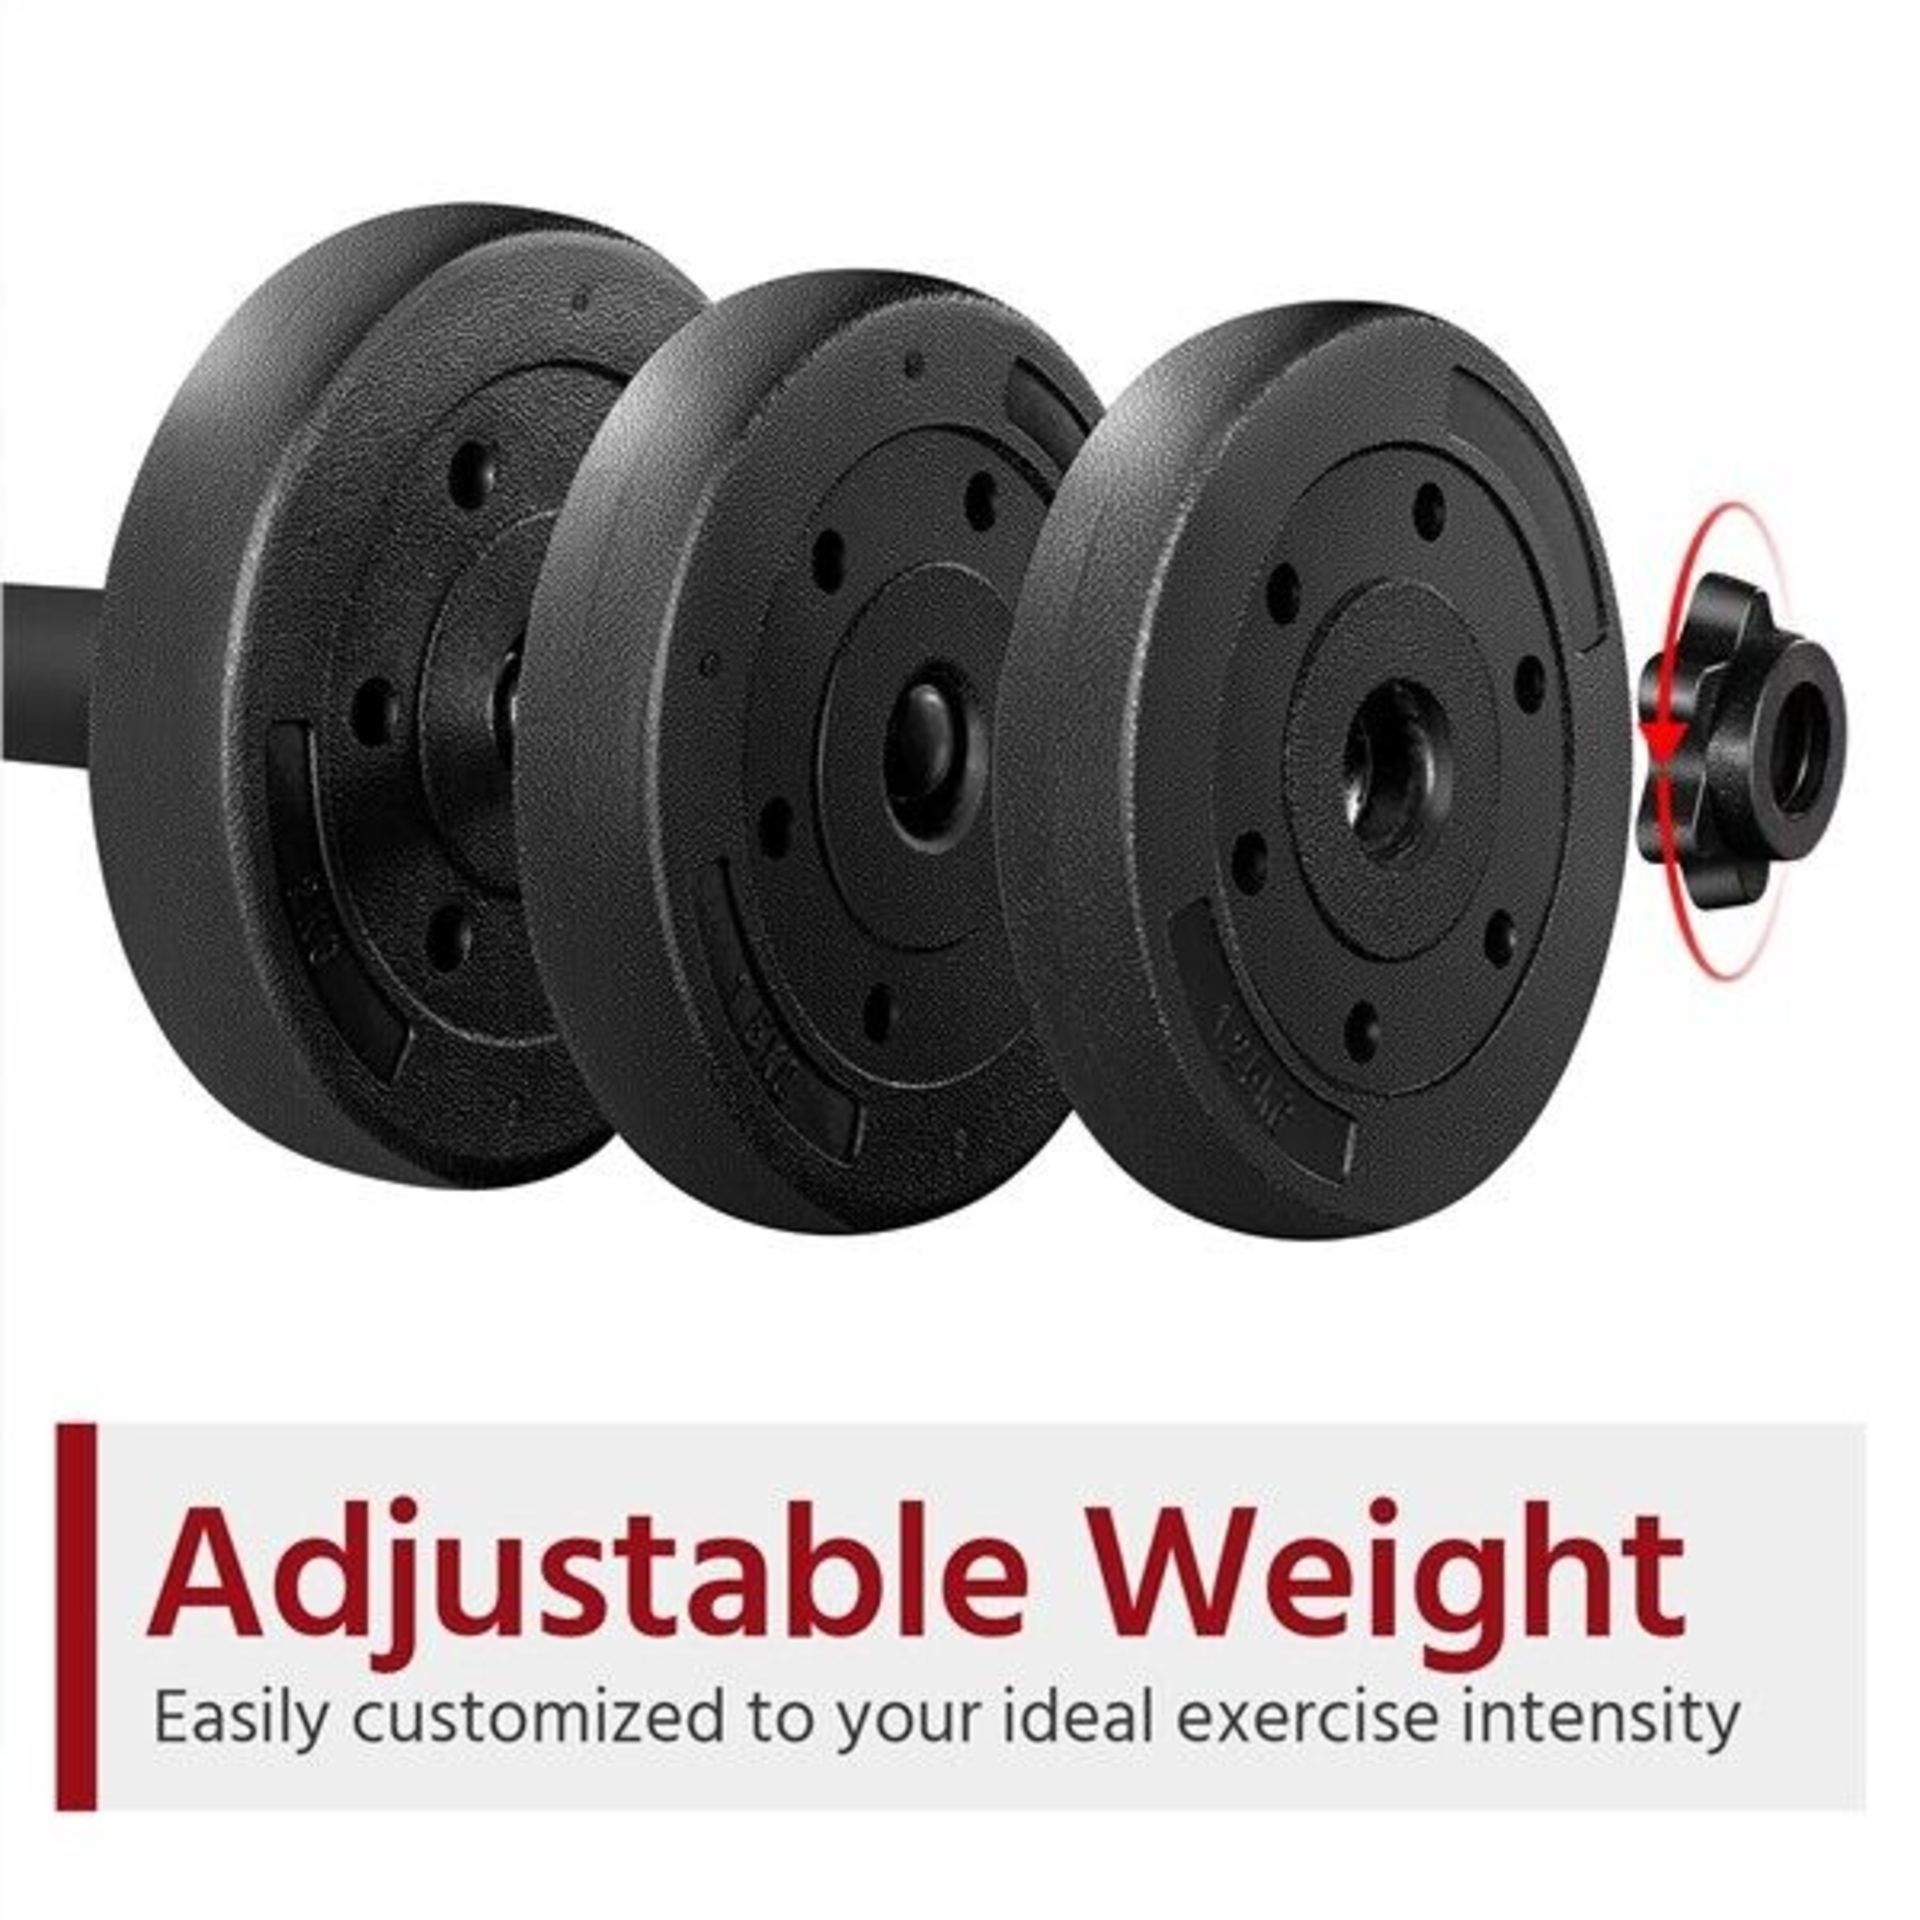 PALLET TO CONTAIN 36 x SETS OF 2 - 20KG ADJUSTABLE WEIGHT DUMBBELL SETS. (PALLET ID: 41I) EACH SET - Image 2 of 8